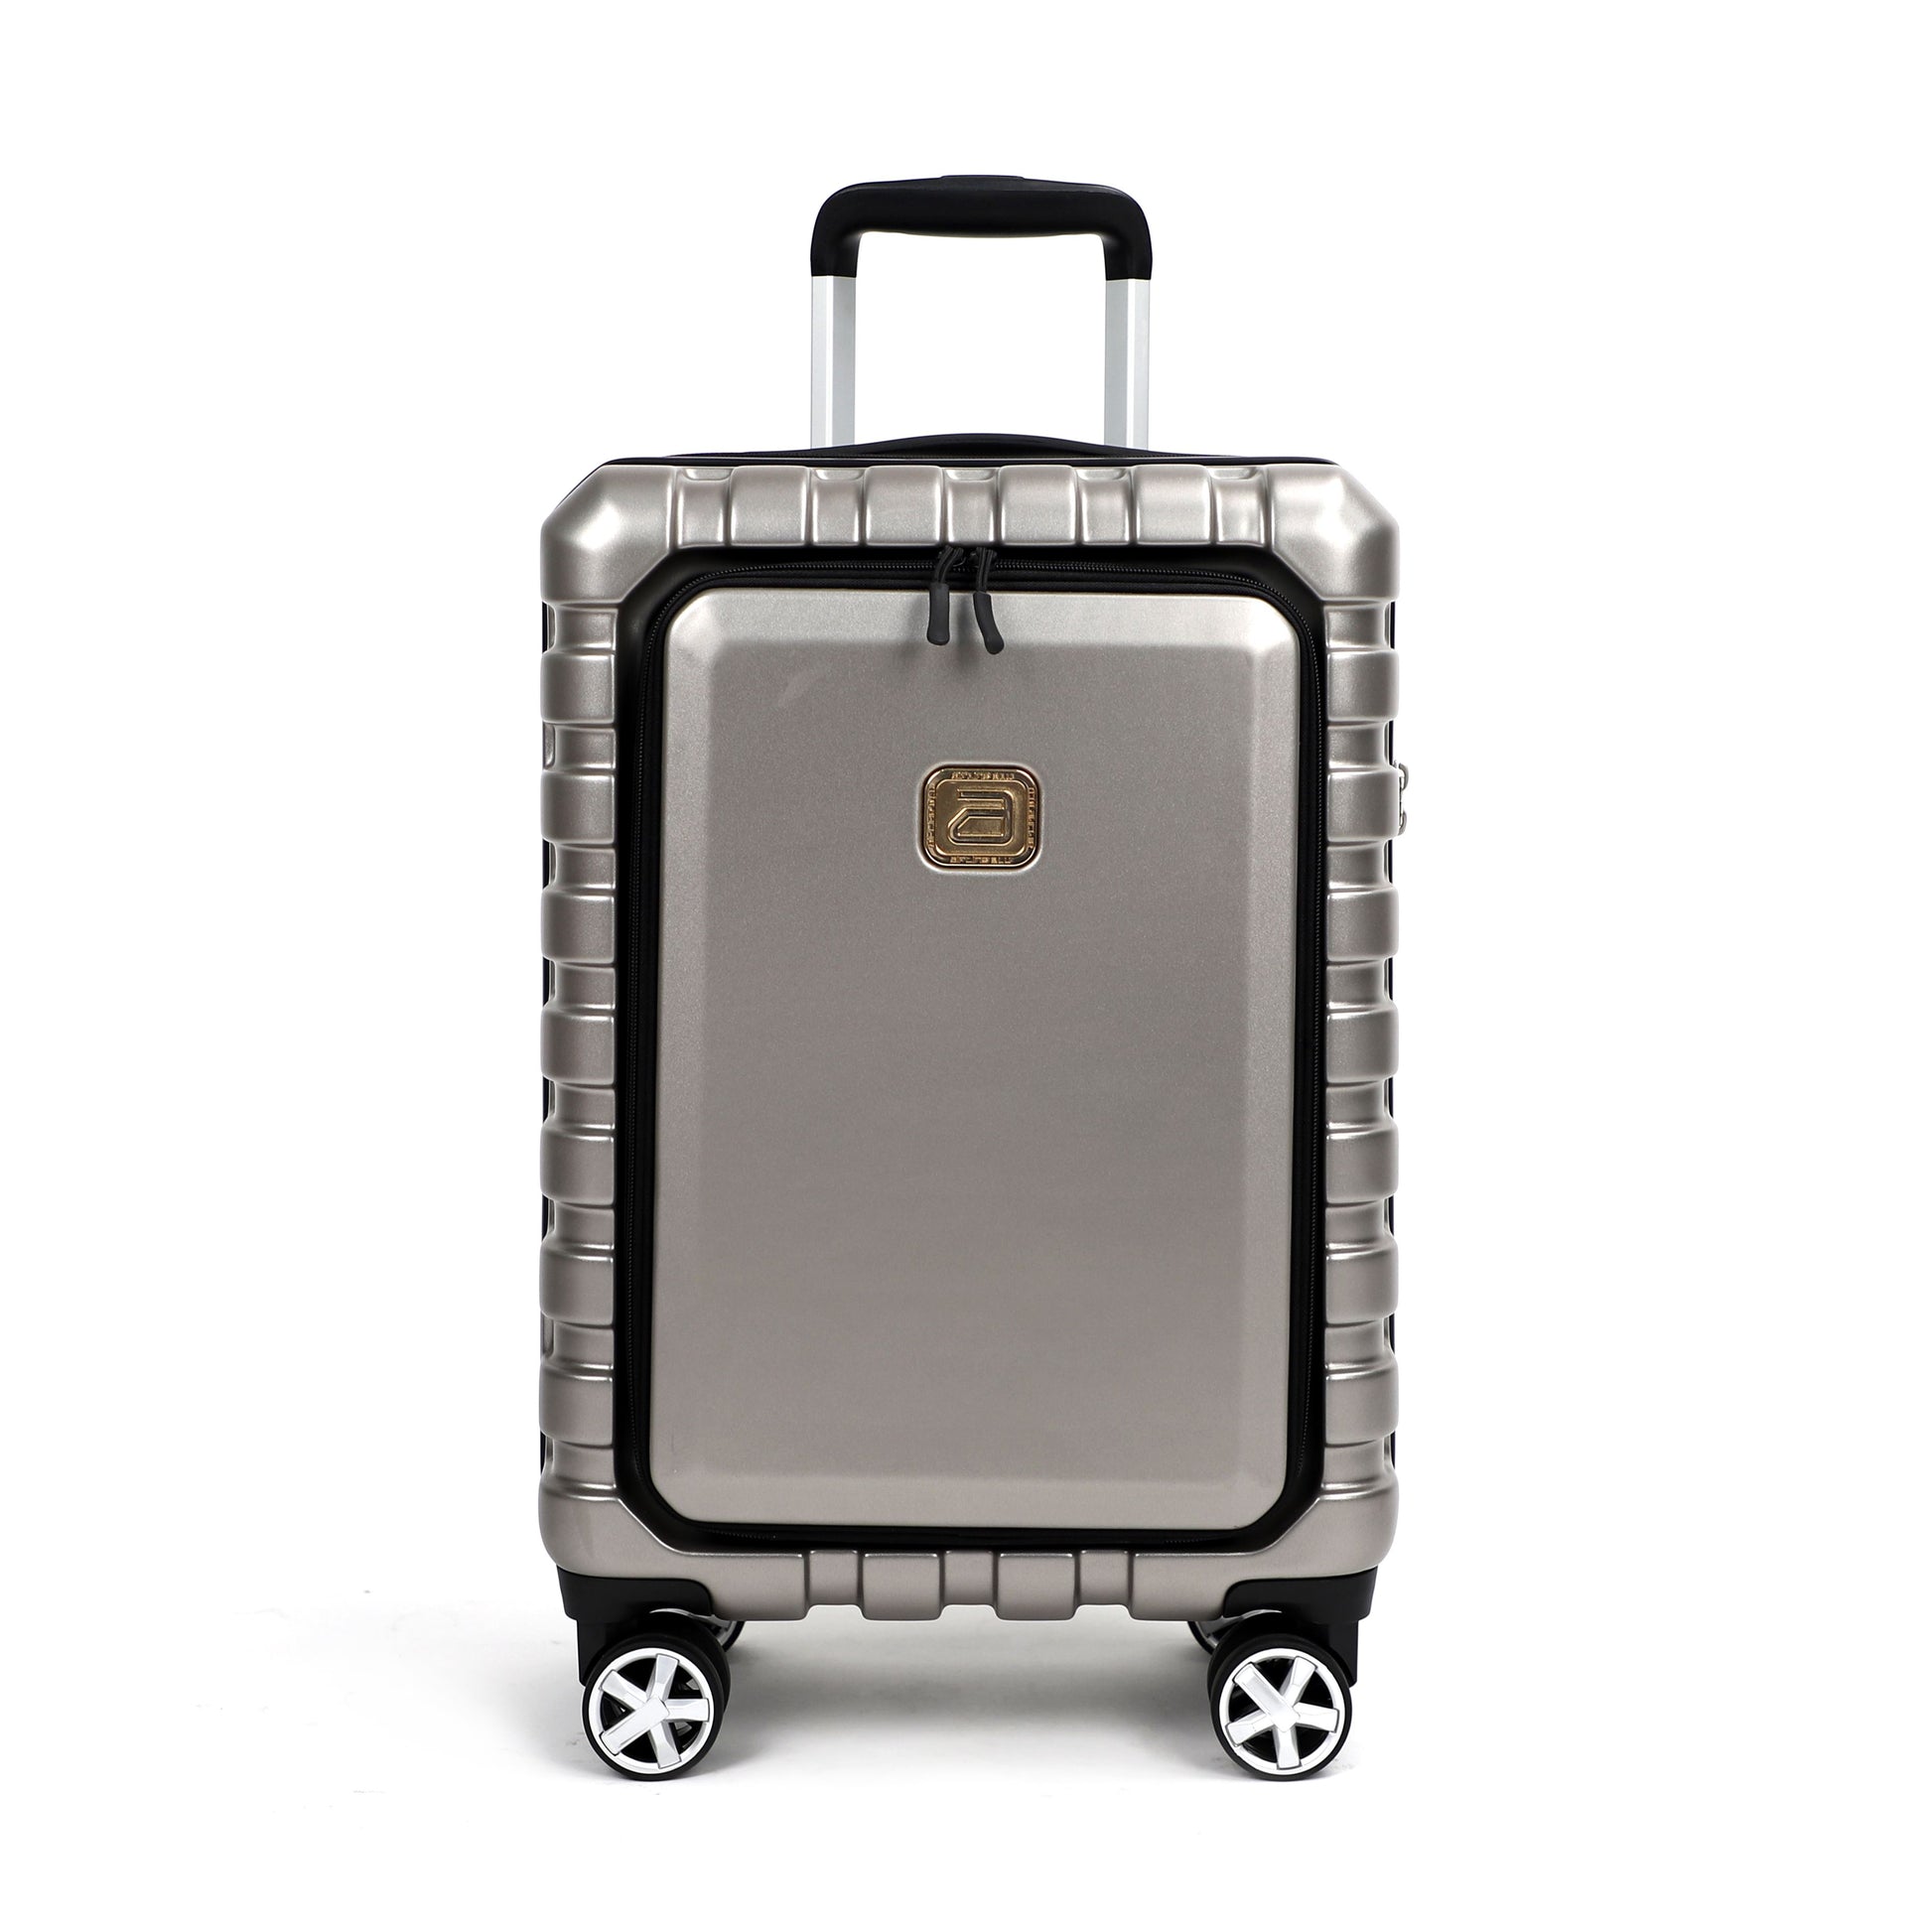 Airline_Carry_On_Luggage_iron_grey_front_viewT1978155101